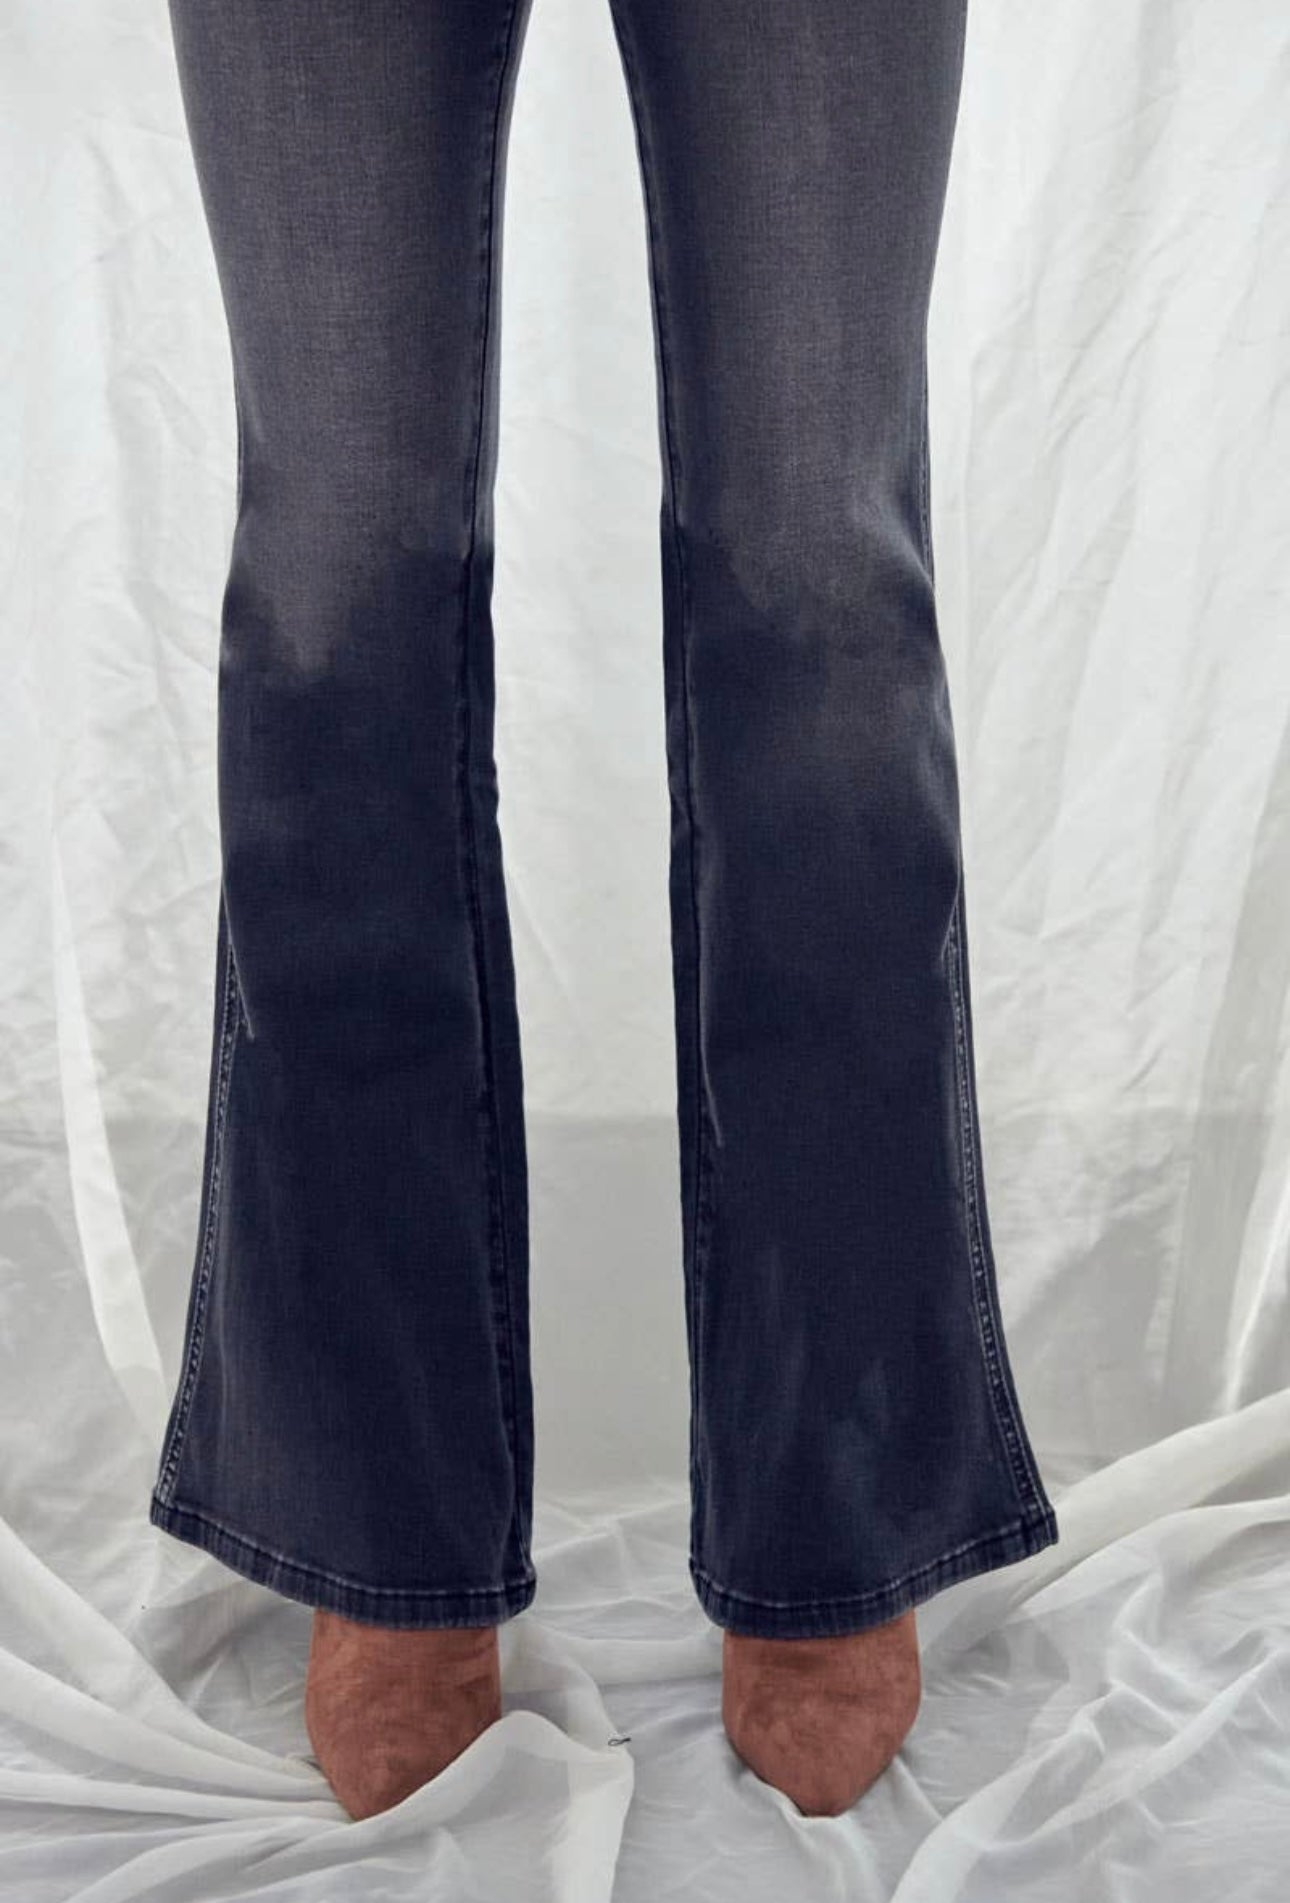 Darby Distressed Flares